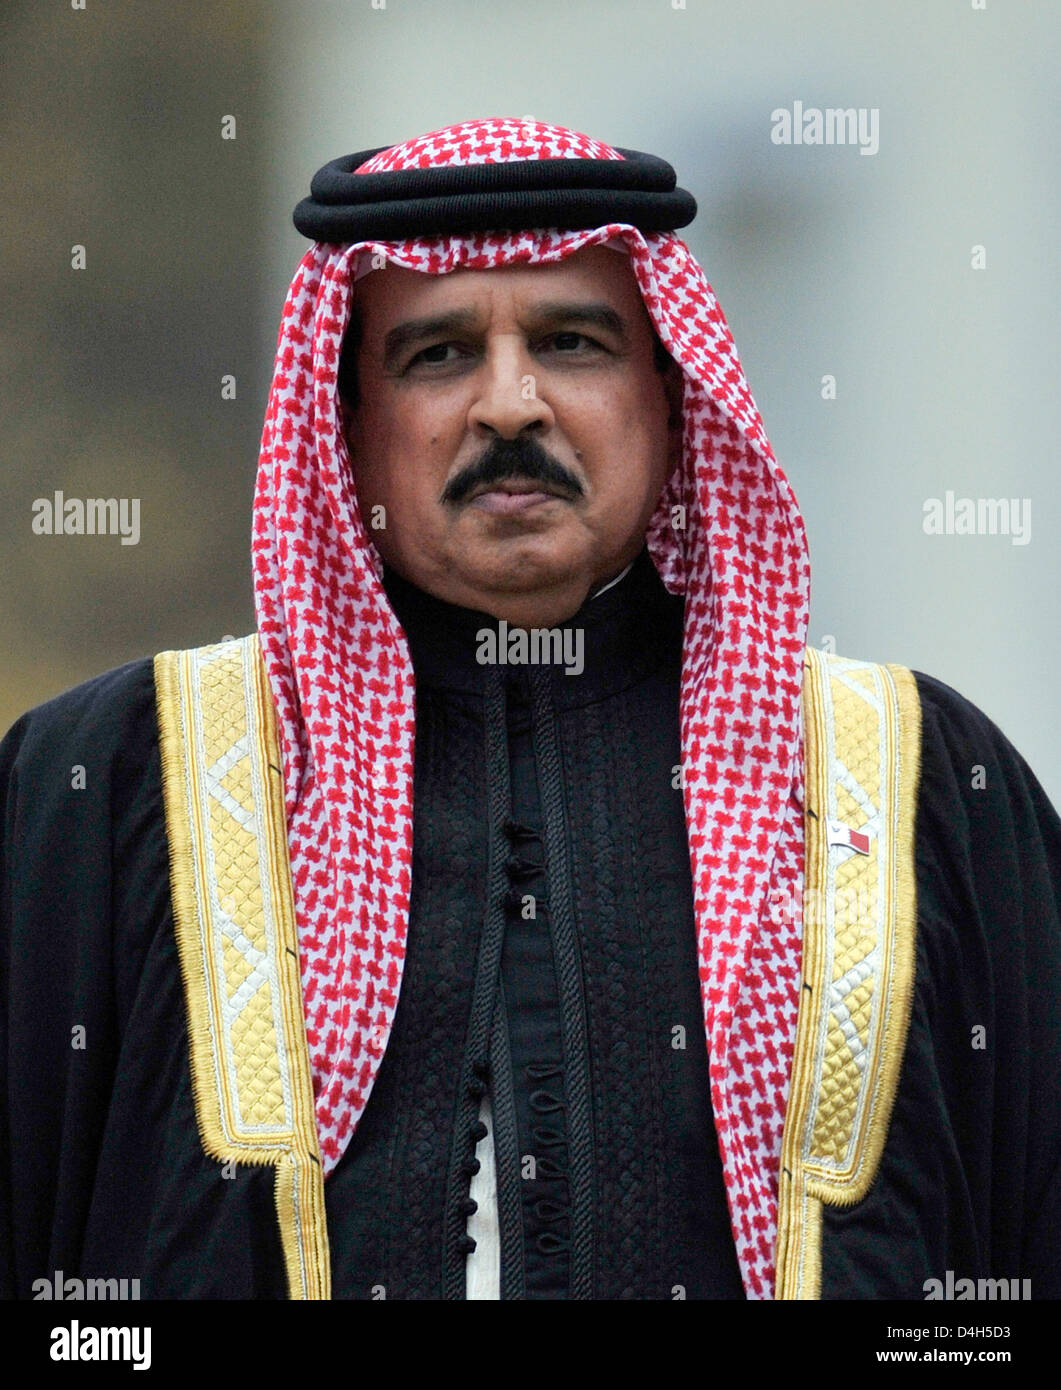 King of Bahrain, Sheik Hamad bin Isa Al Khalifa, captured during his  official visit to Germany at Castle Bellevue in Berlin, Germany, 27 October  2008. Photo: Gero Breloer Stock Photo - Alamy